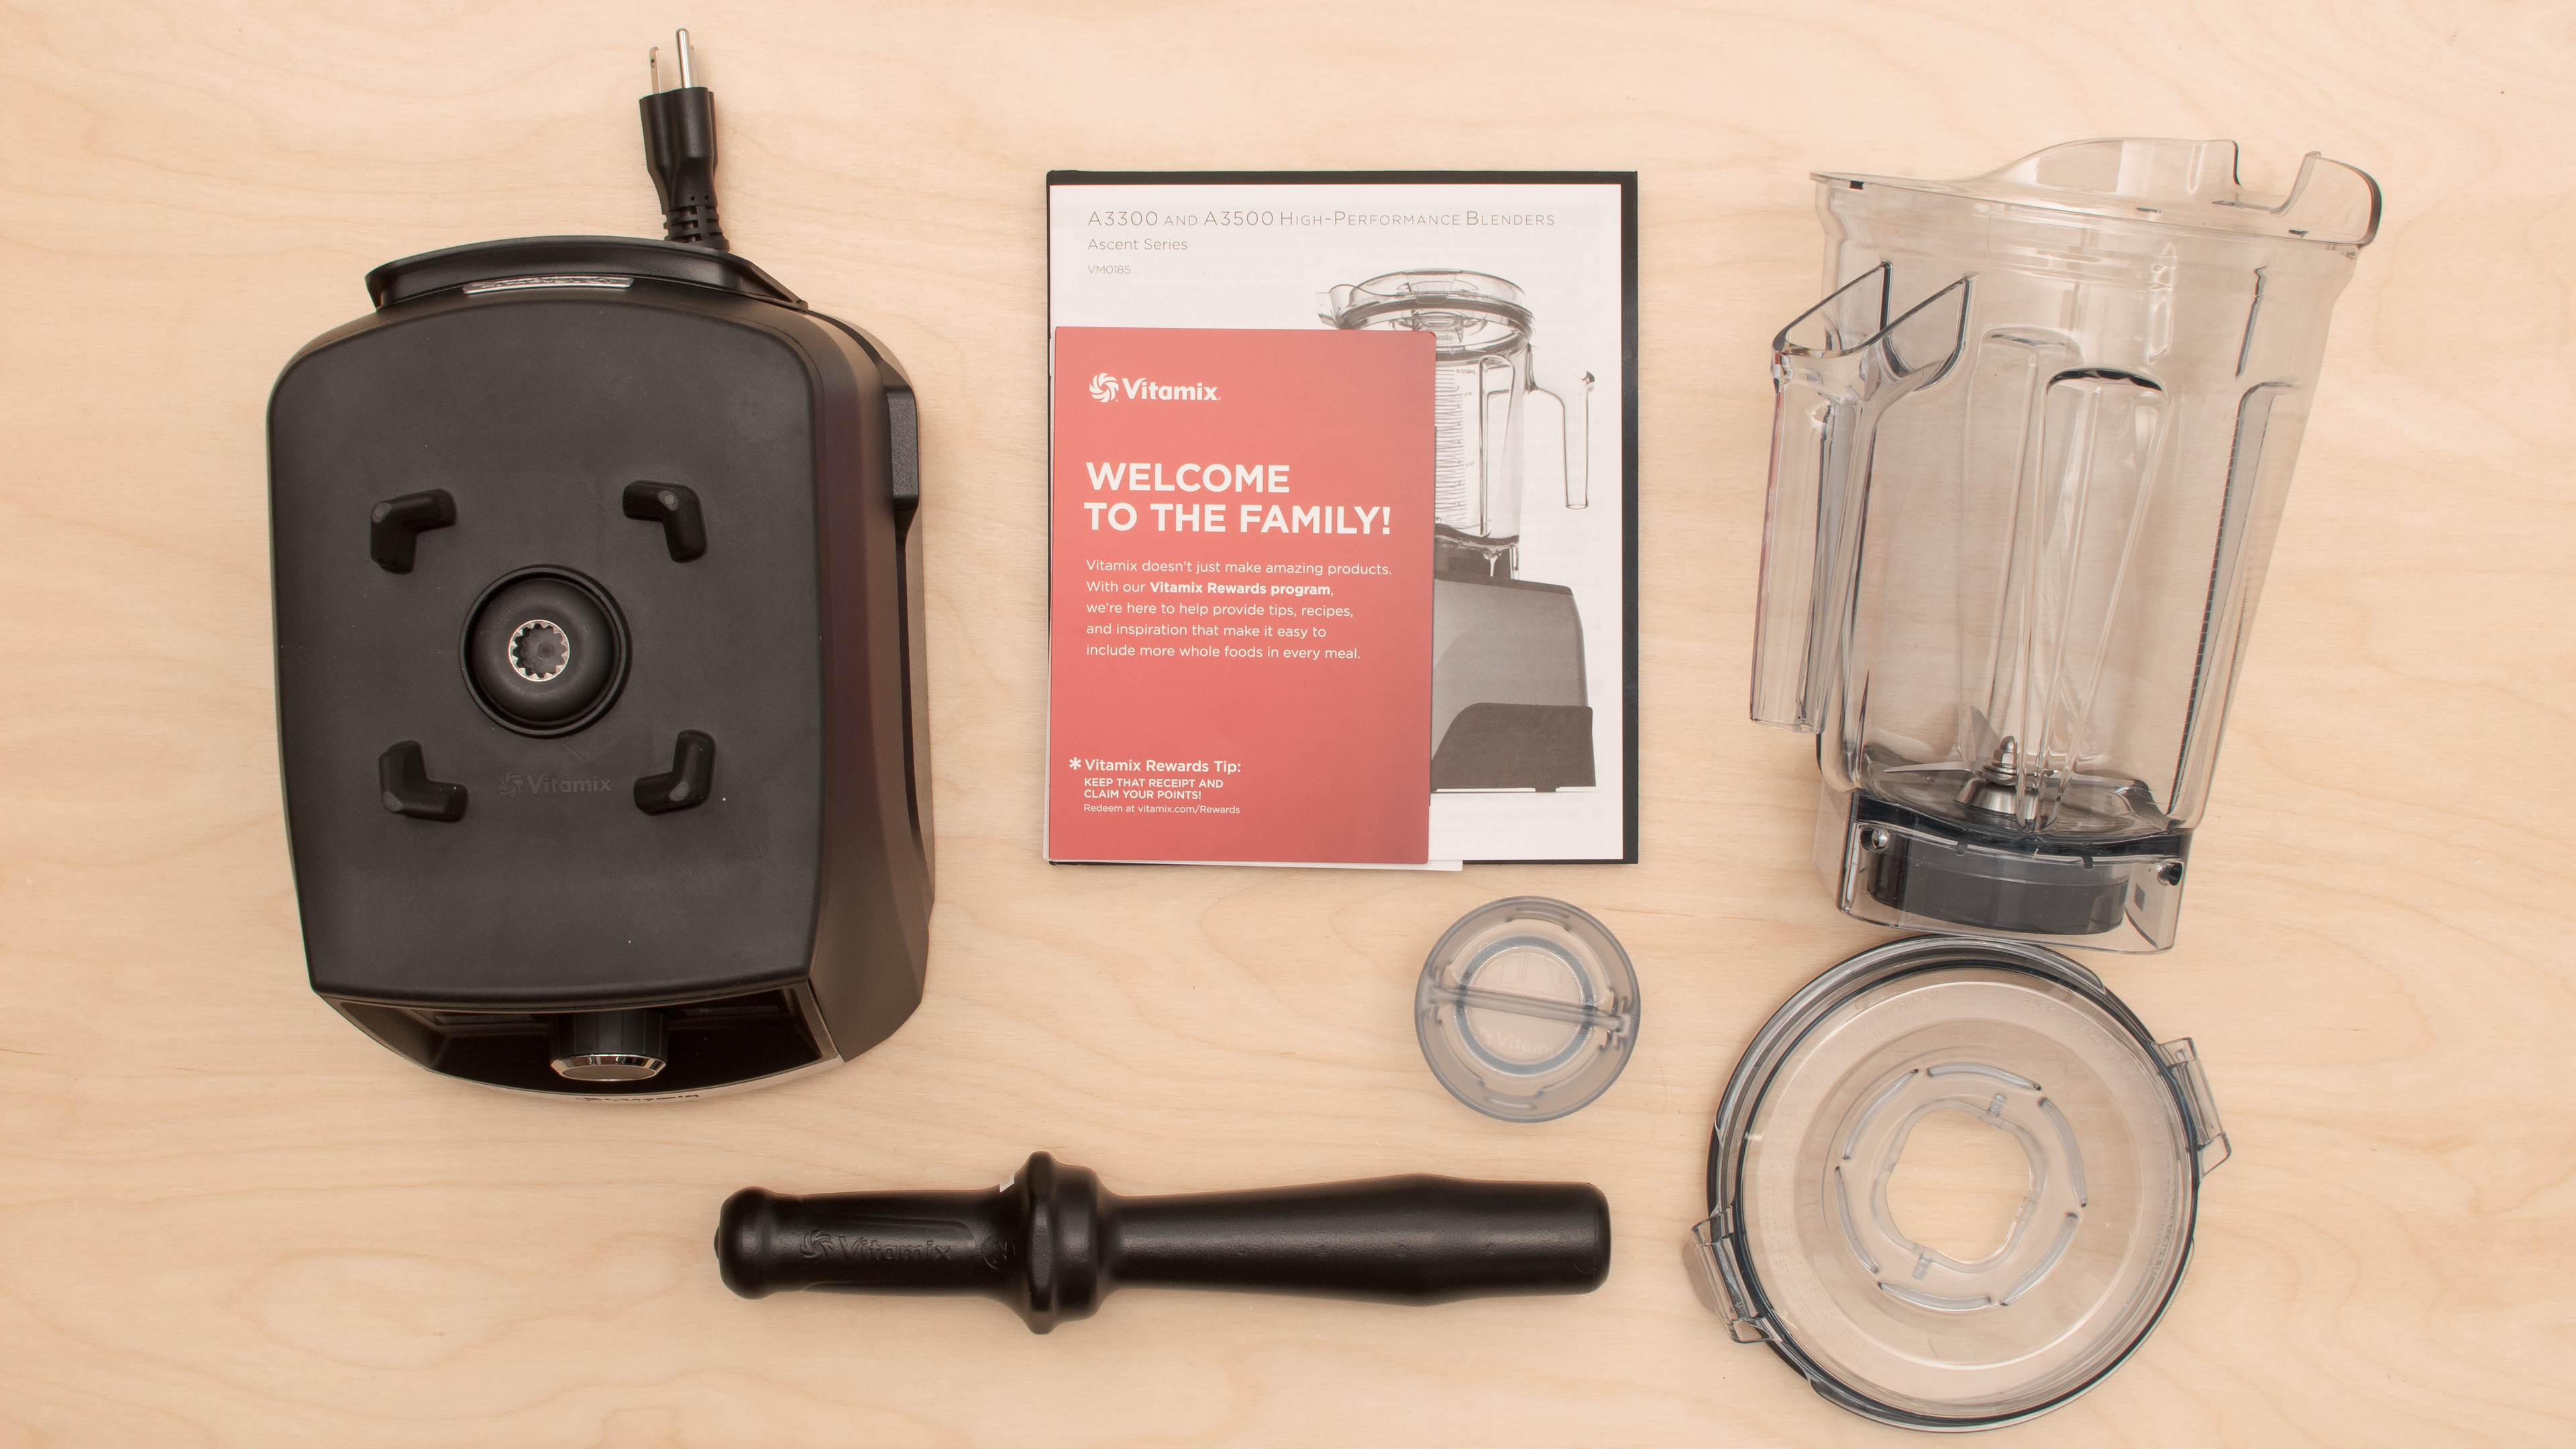 https://www.rtings.com/assets/products/LmRDTp97/vitamix-a3500/in-the-box-large.jpg